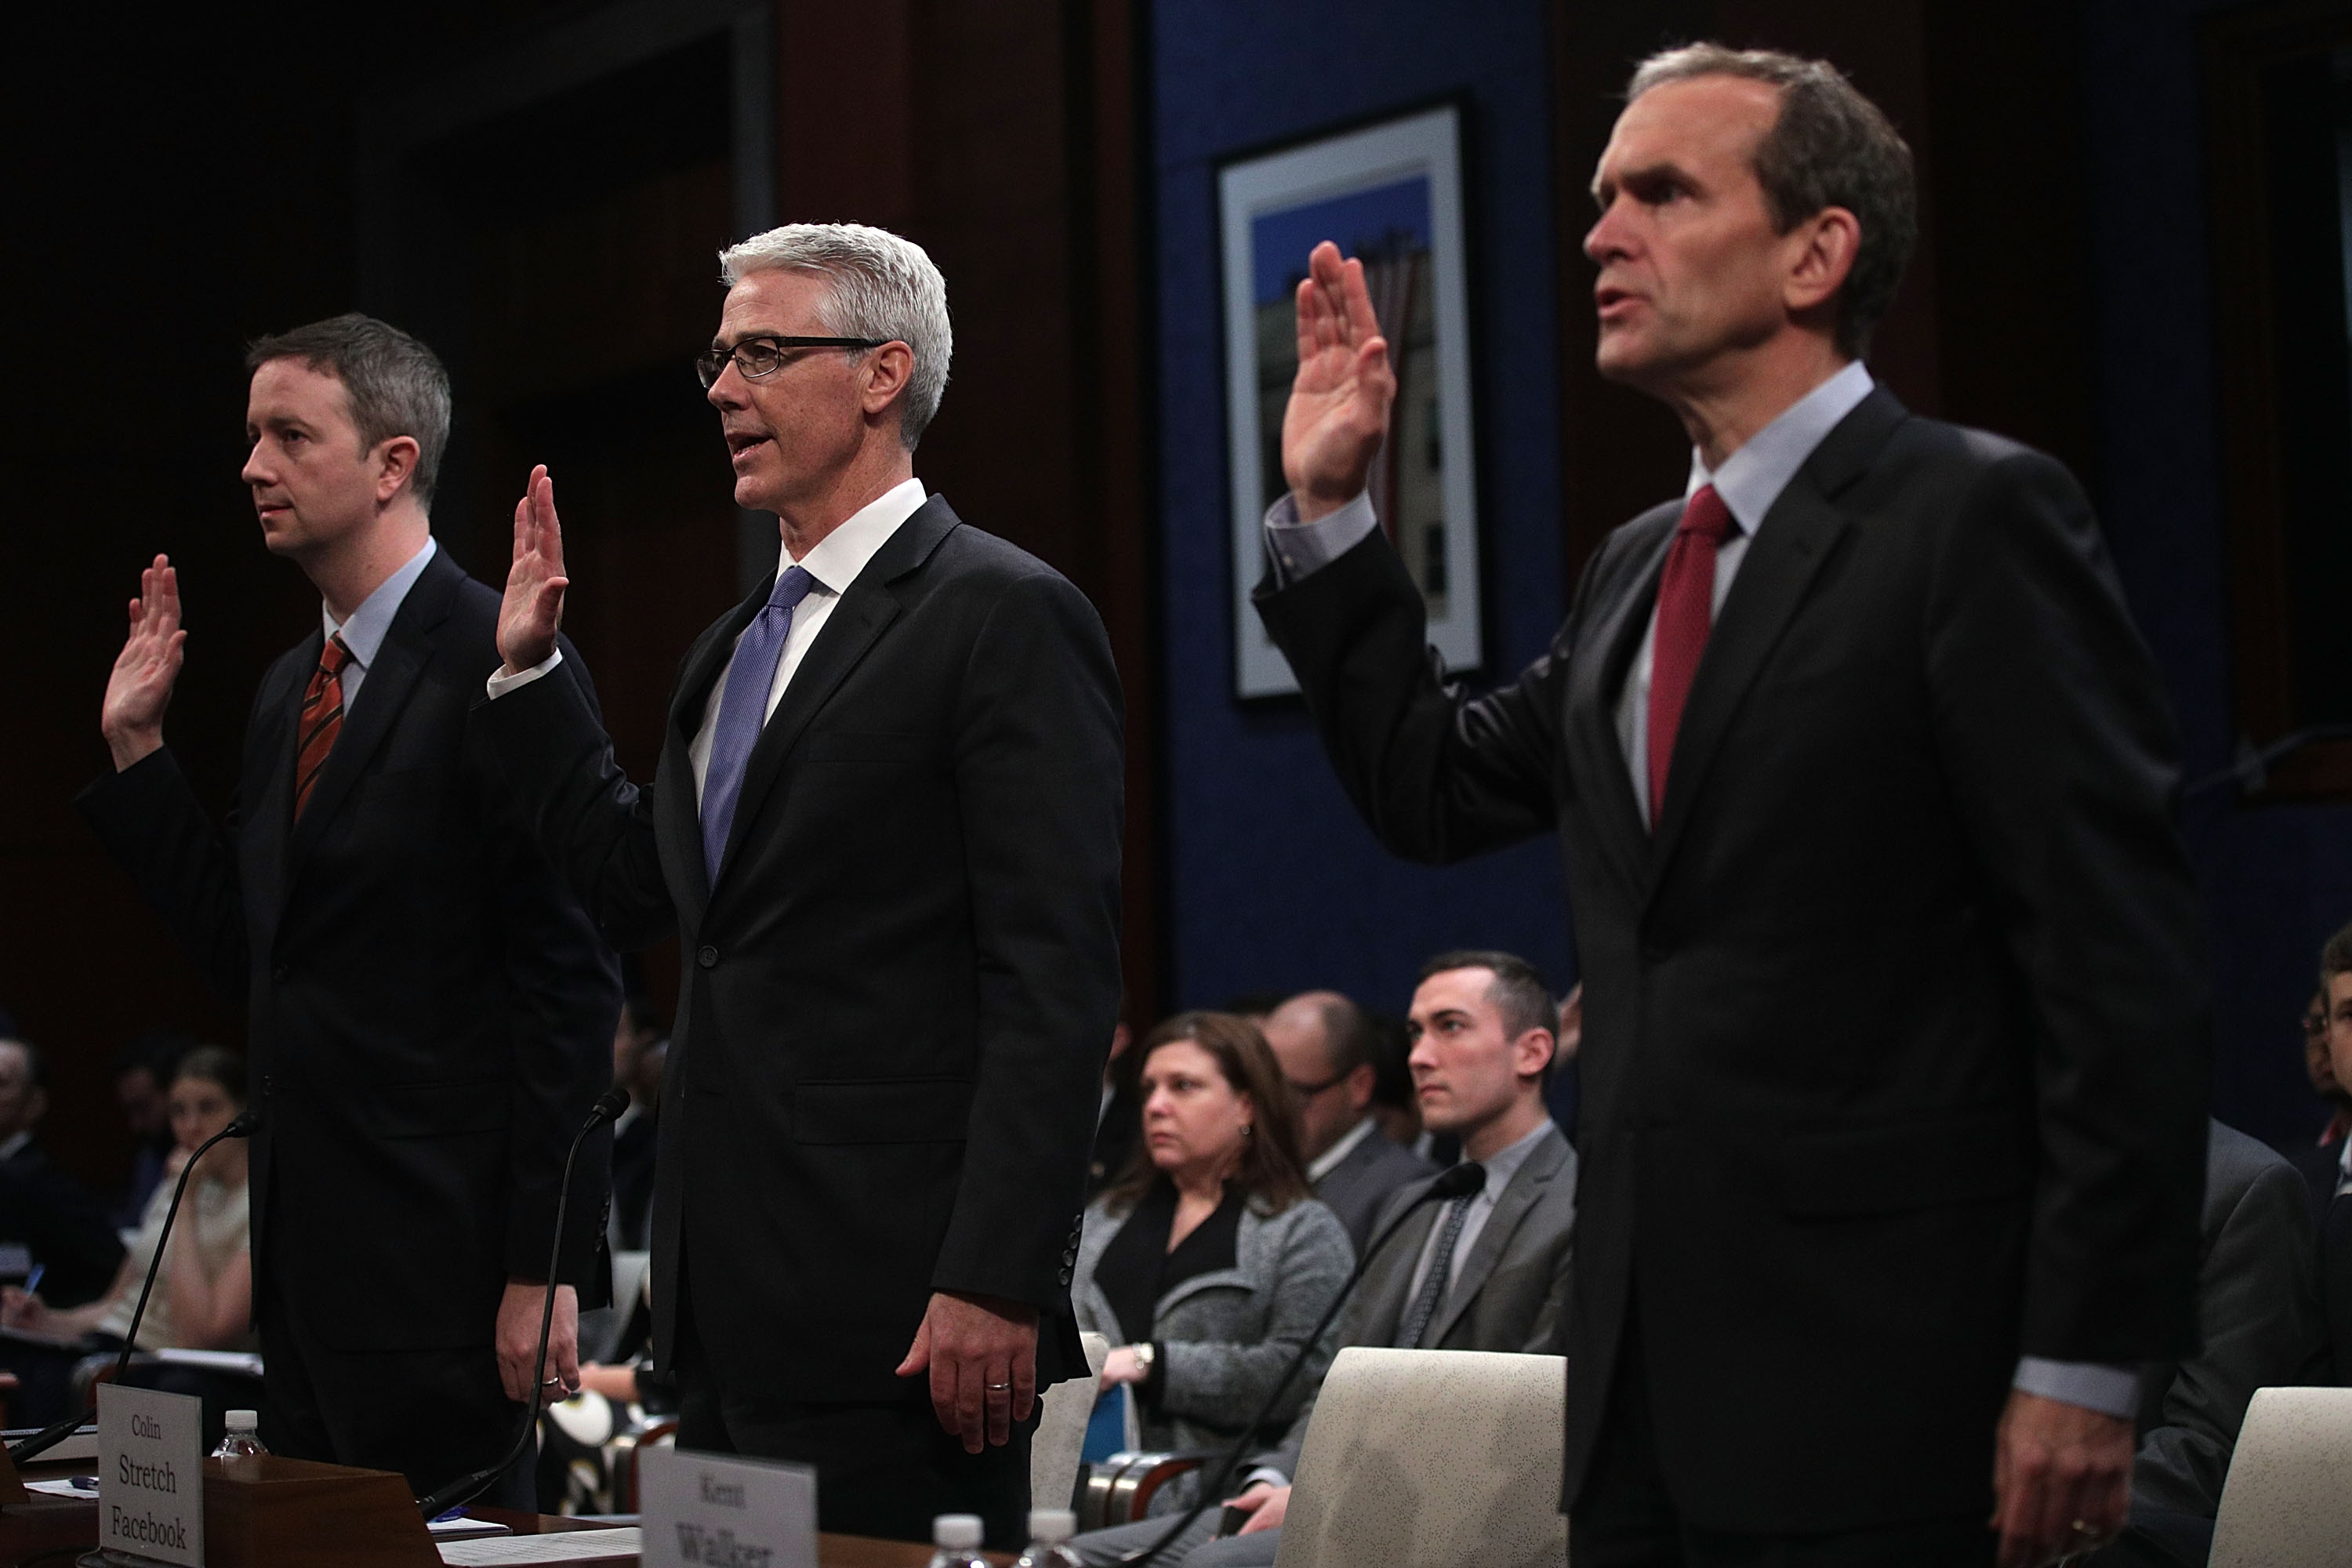 General Counsel for Twitter Sean Edgett, Vice President and General Counsel for Facebook Colin Stretch, and Senior Vice President and General Counsel for Google Kent Walker are sworn in before testifying to Congress.